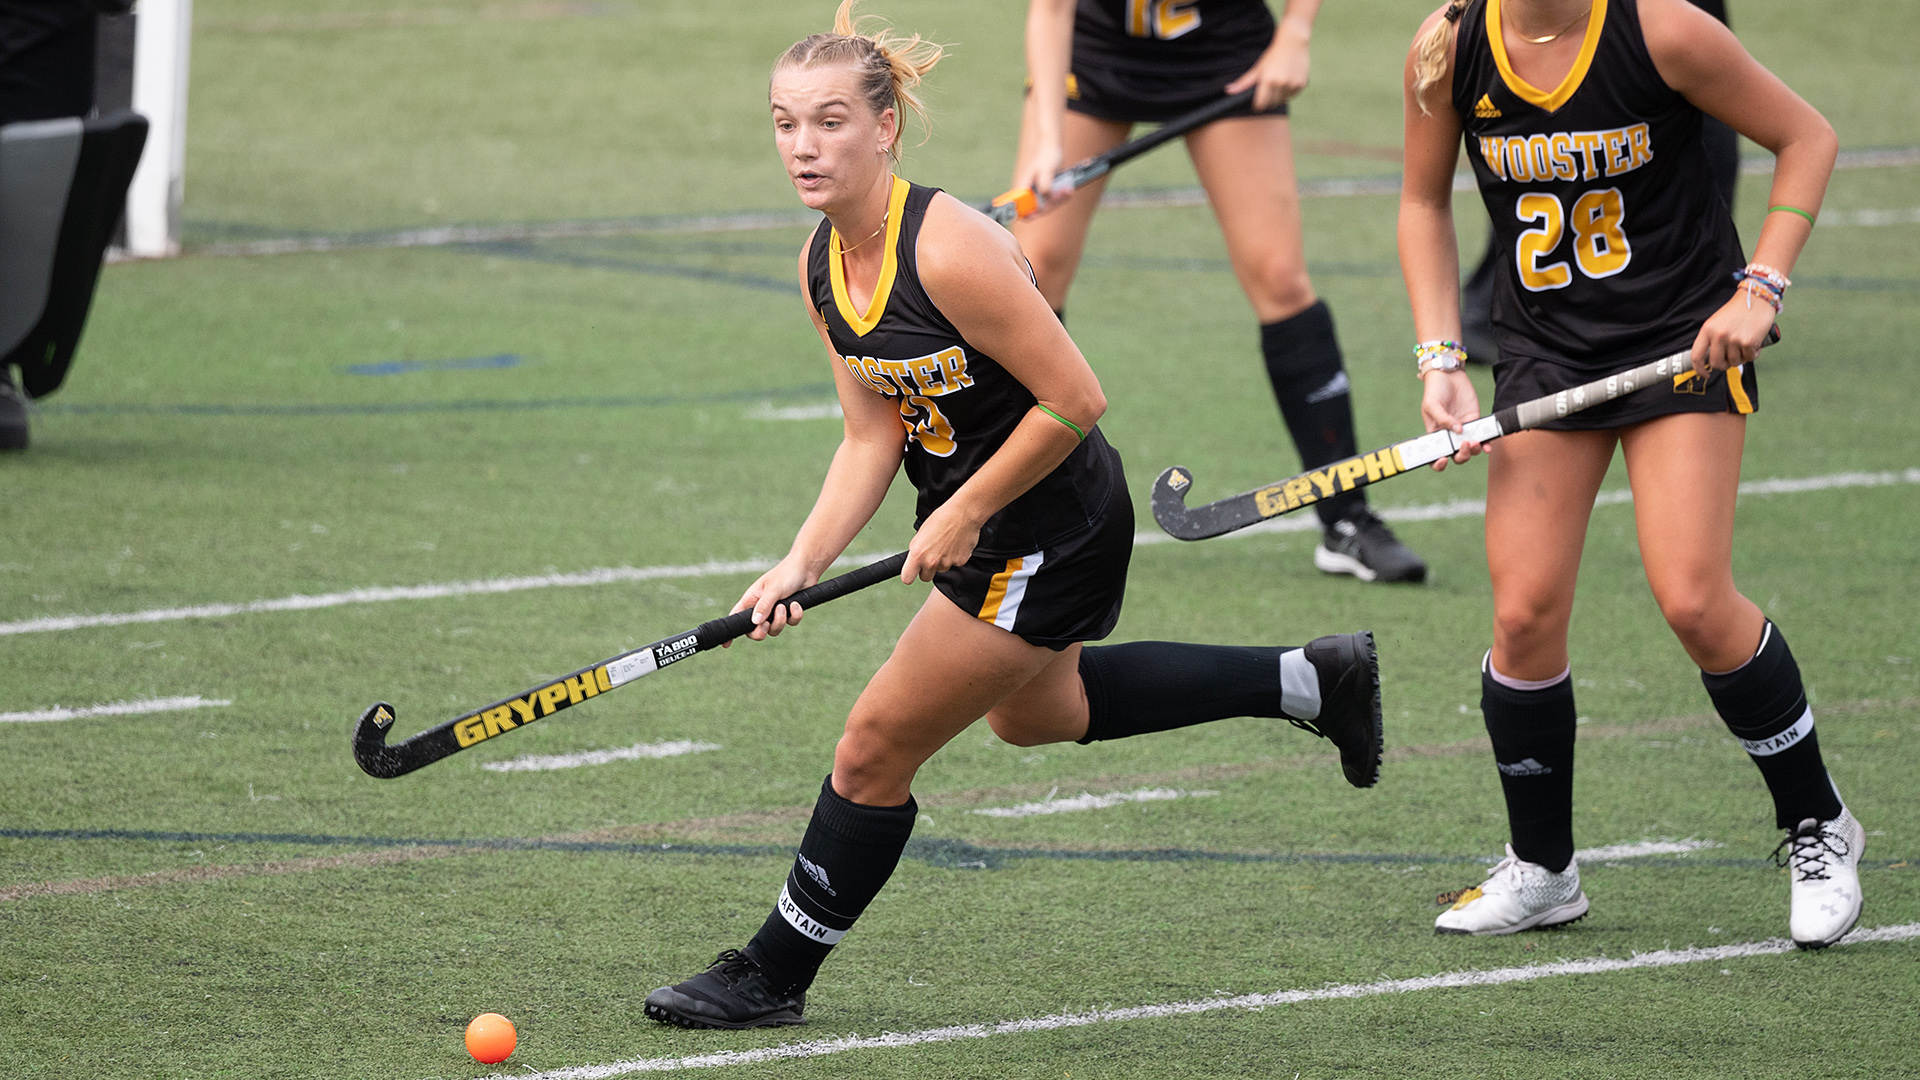 Syd Schuster College of Wooster Field Hockey